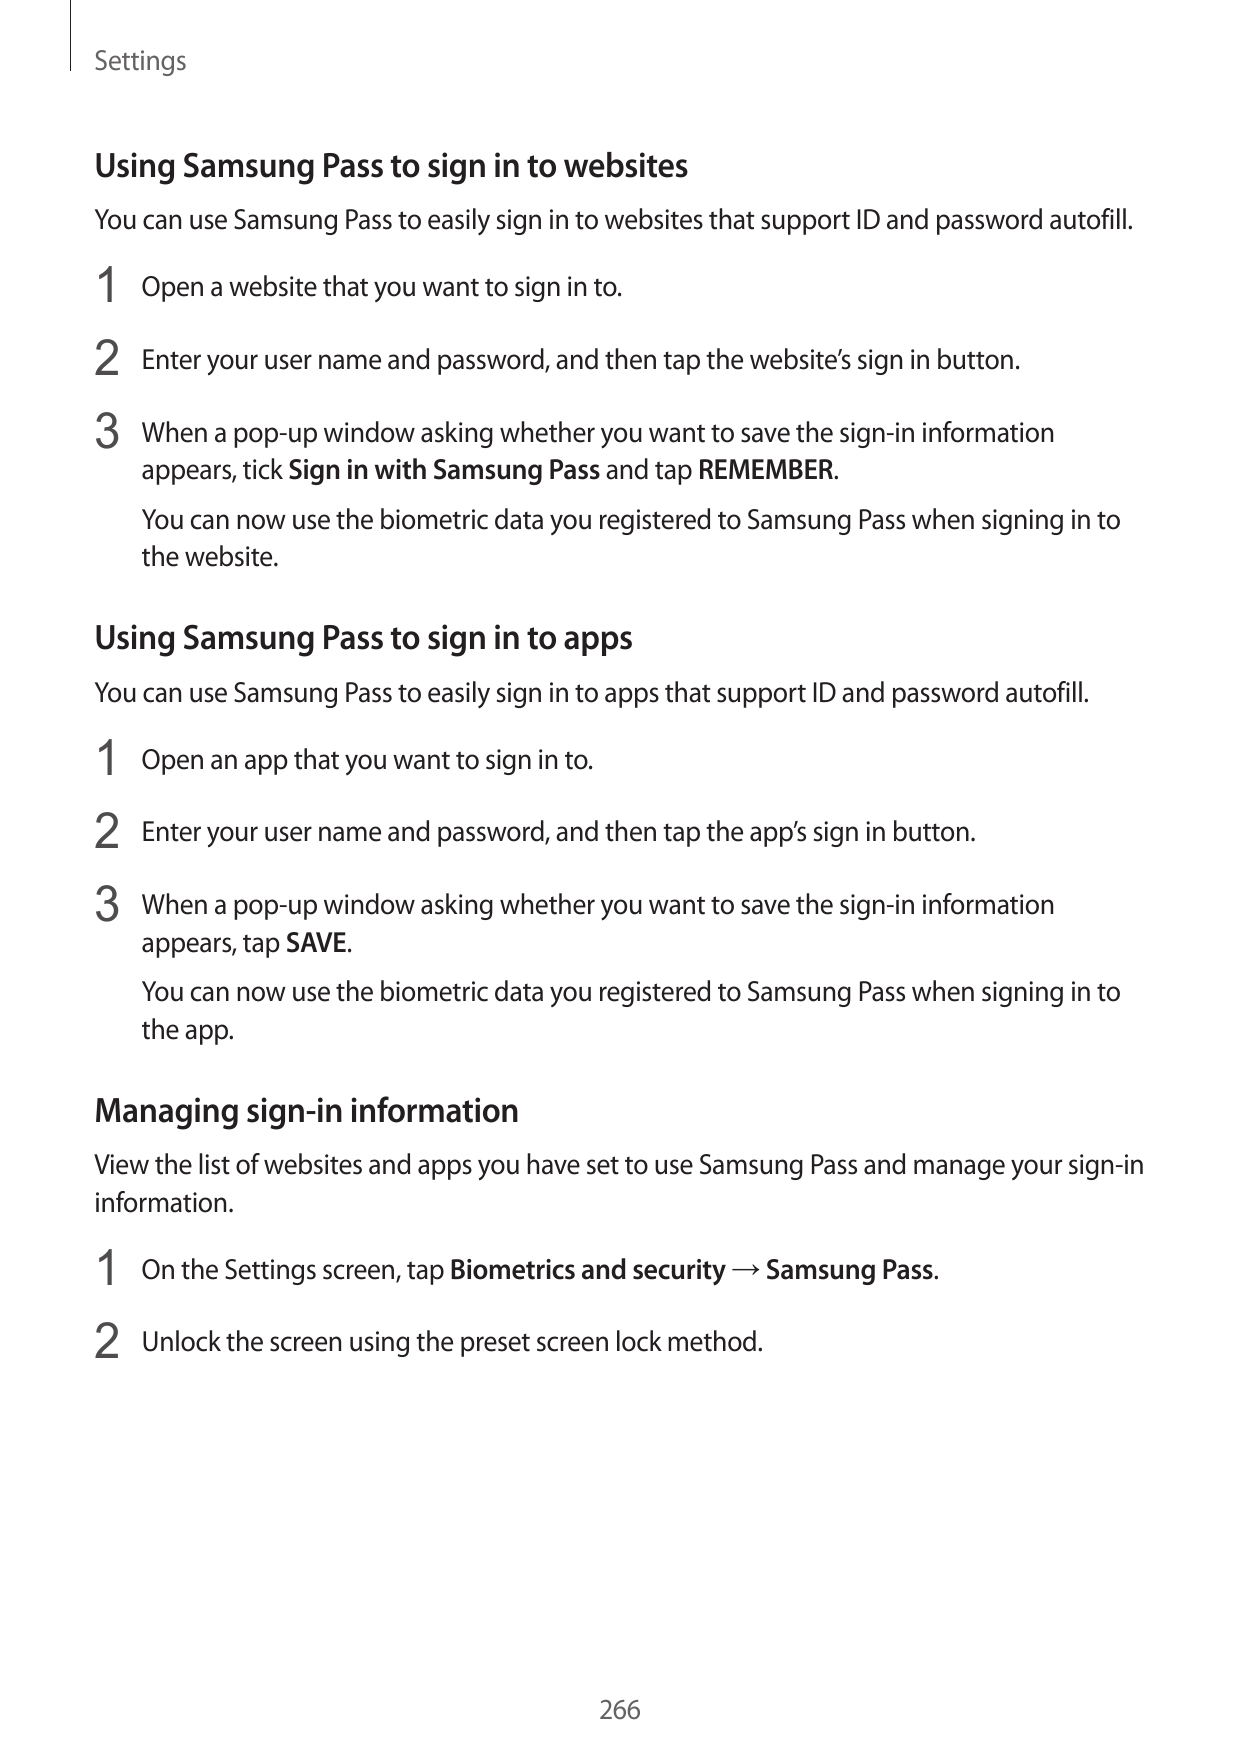 SettingsUsing Samsung Pass to sign in to websitesYou can use Samsung Pass to easily sign in to websites that support ID and pass